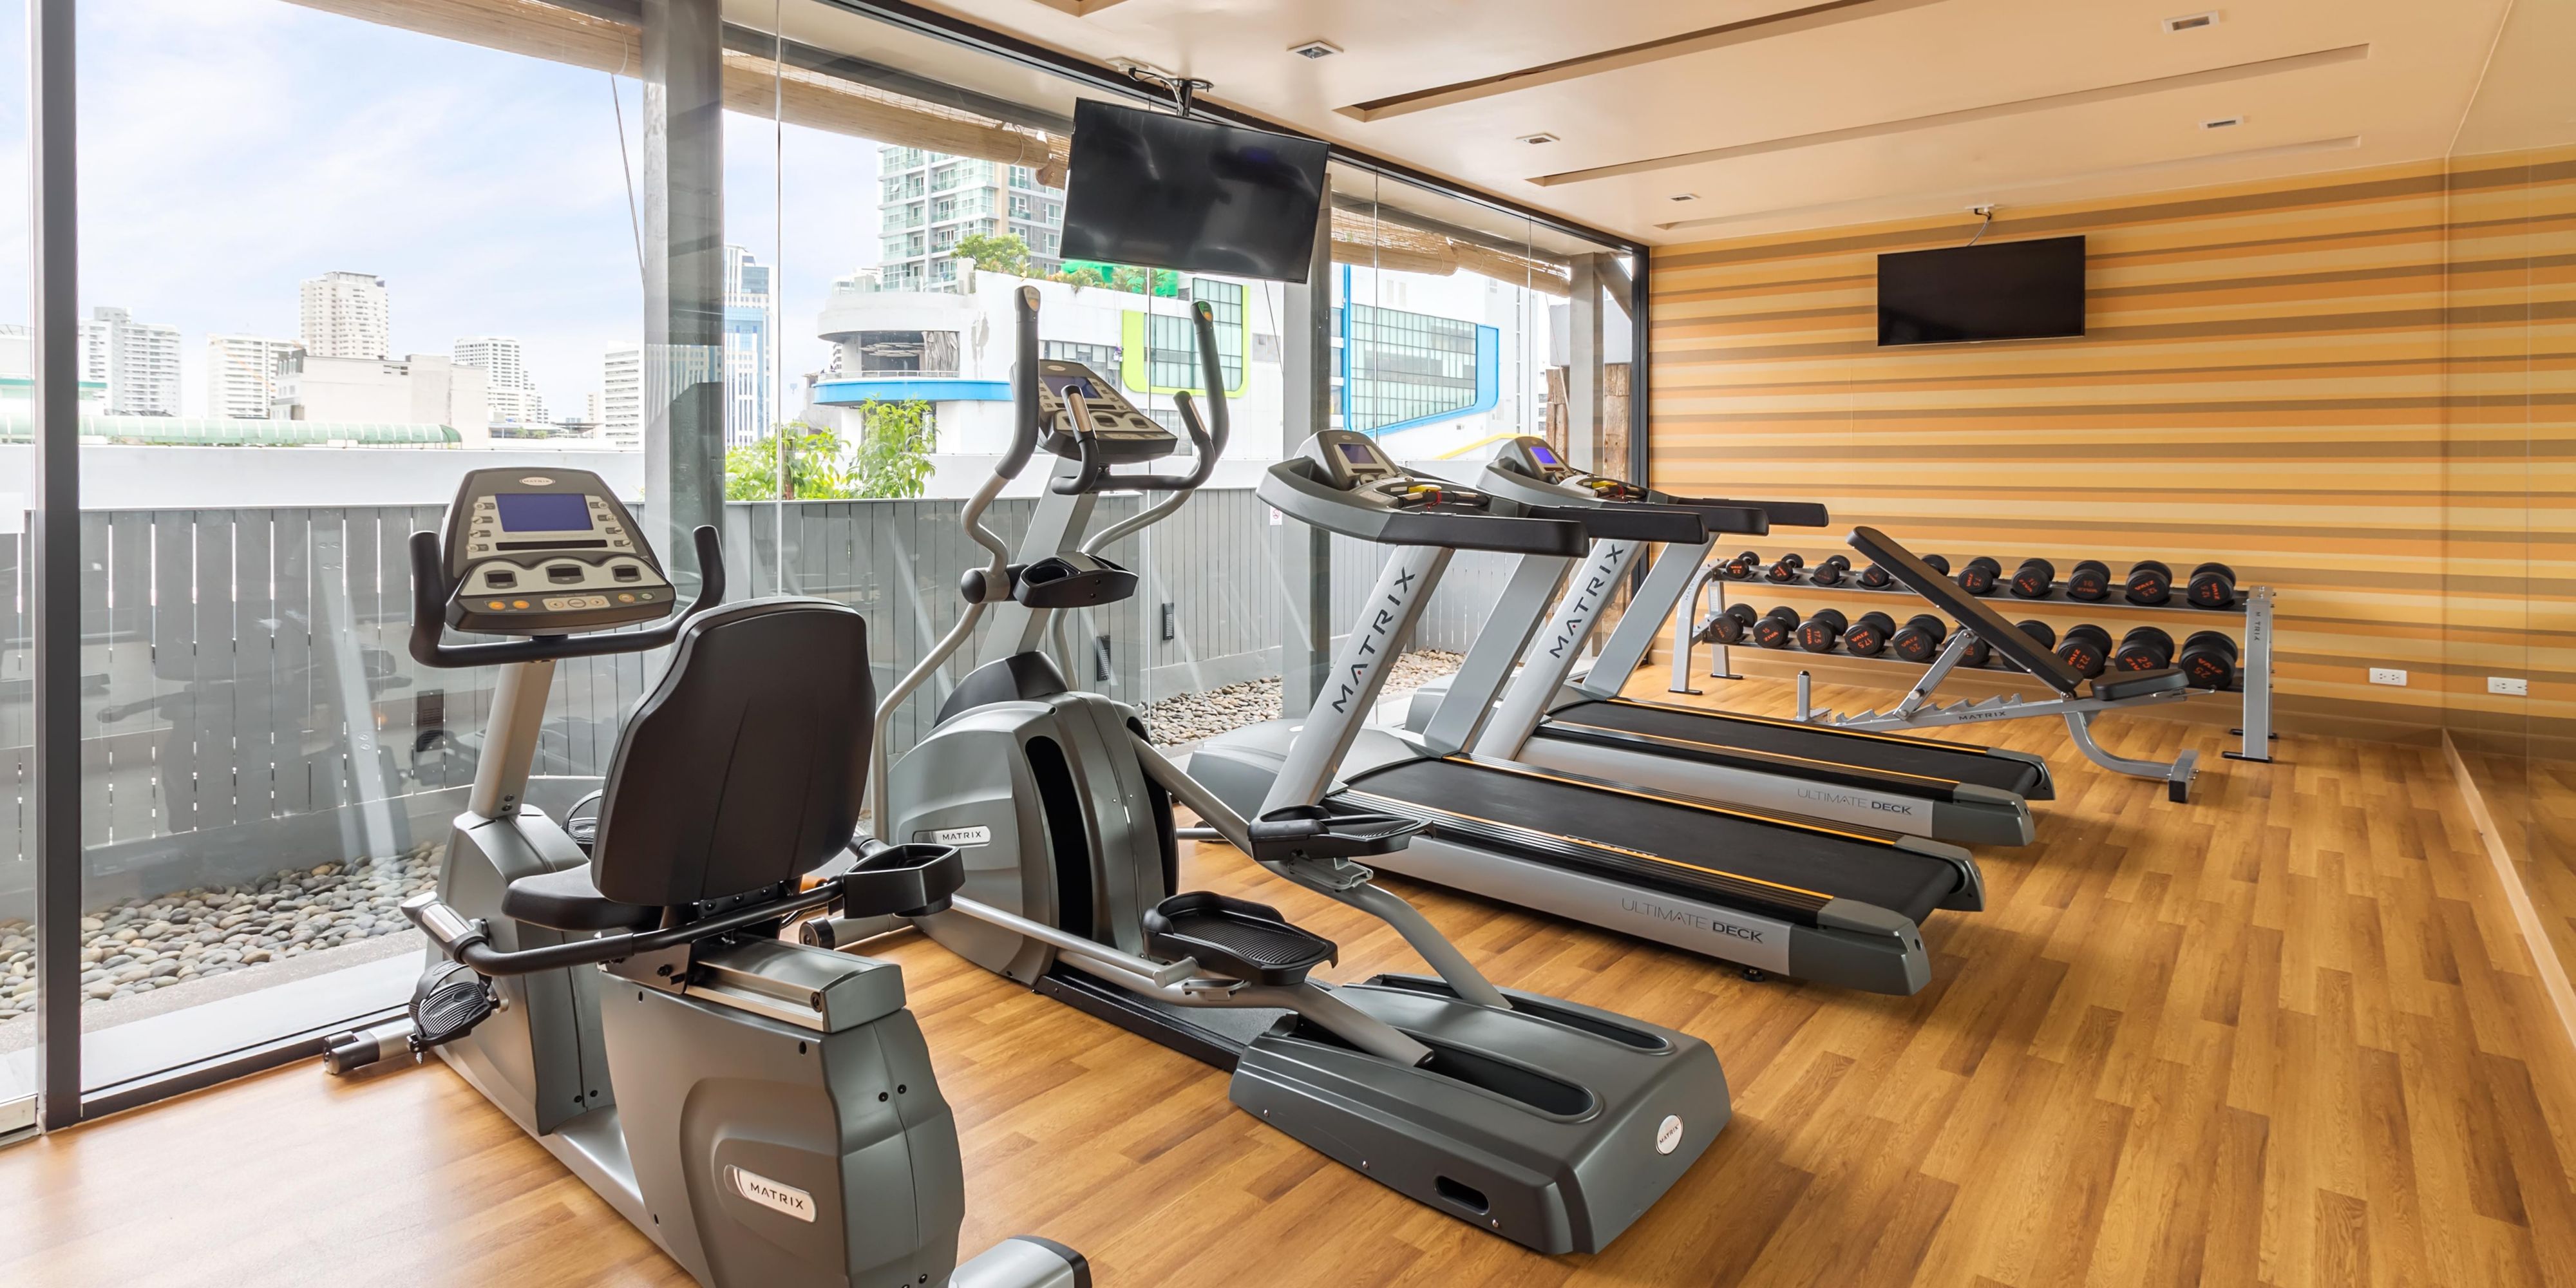 At Holiday Inn Express, you are allowed to manage everything at your own pace with our 24-hour facilities like the Laundry Room and Fitness Centre. 